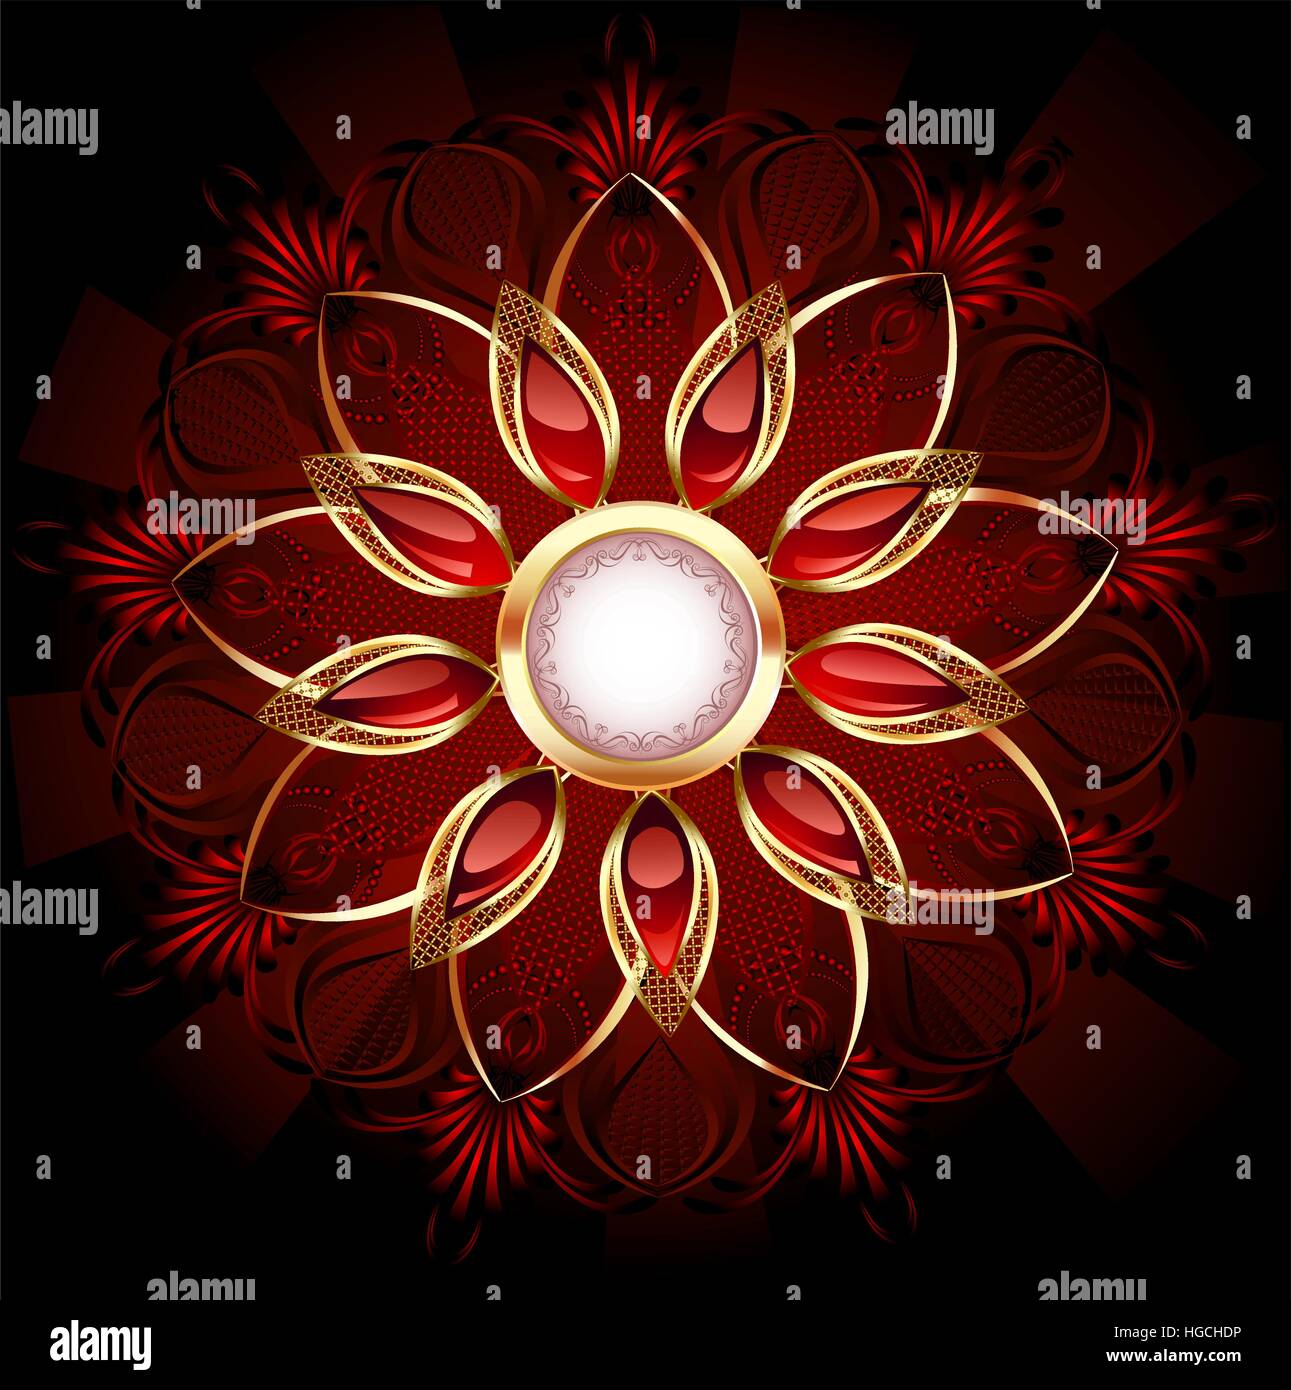 Round banner decorated with abstract flower jewelry with red, smooth rubies. Stock Vector